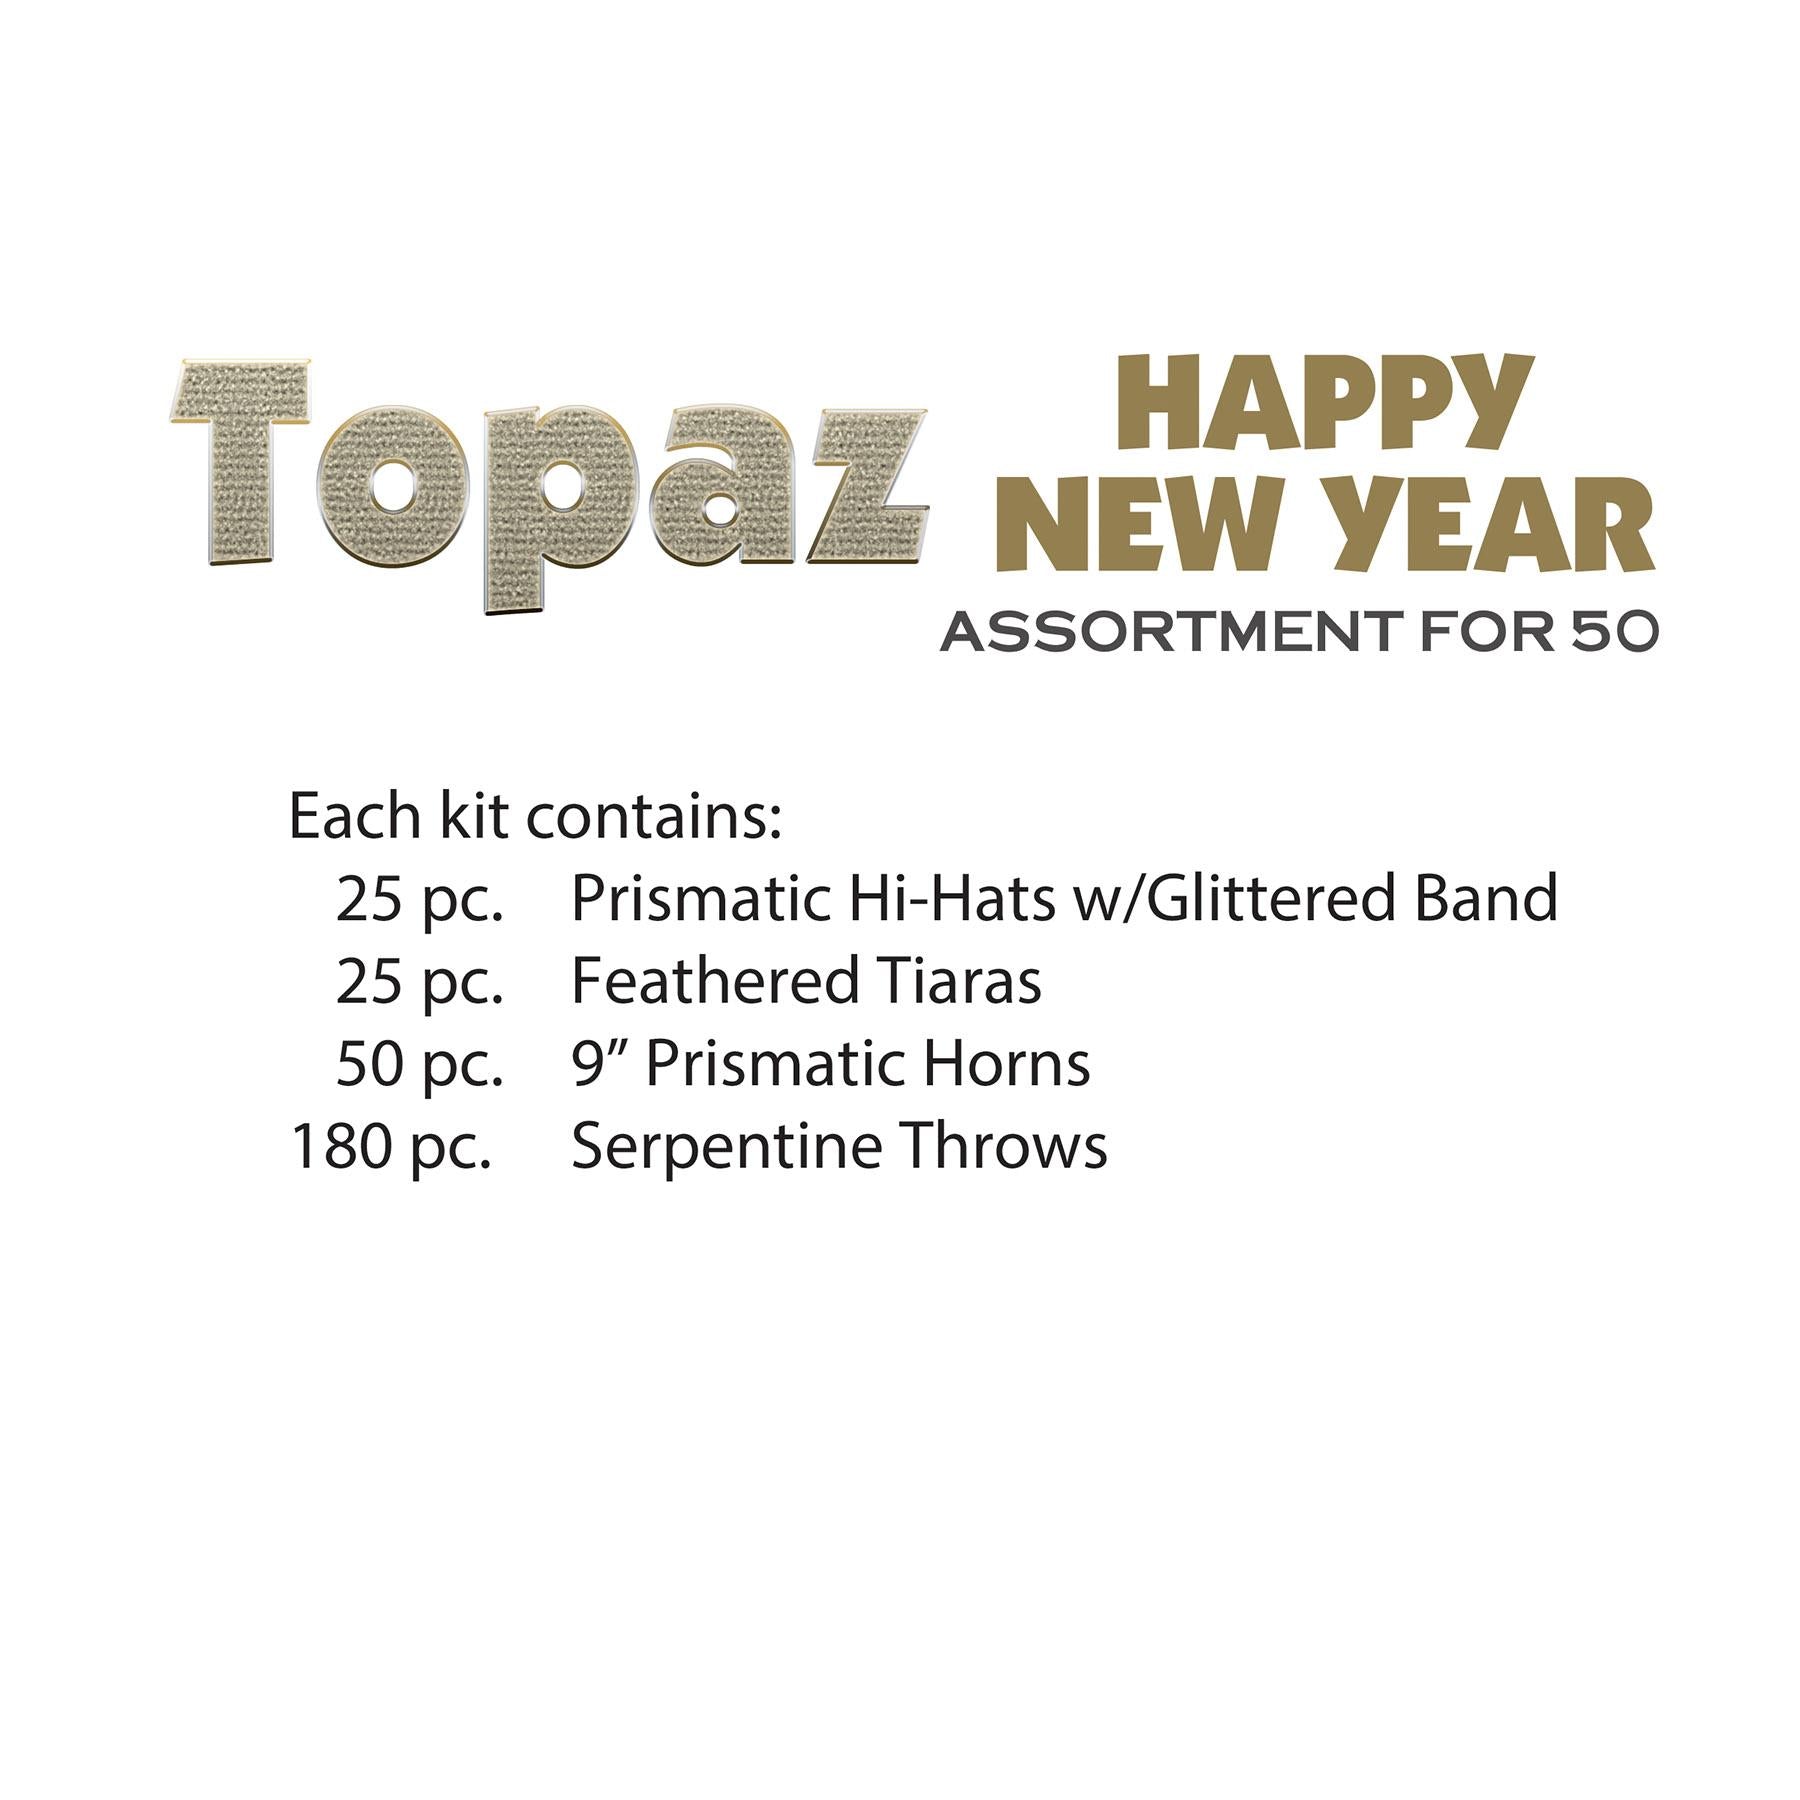 Topaz Happy New Year New Year's Eve Party Kit for 50 People